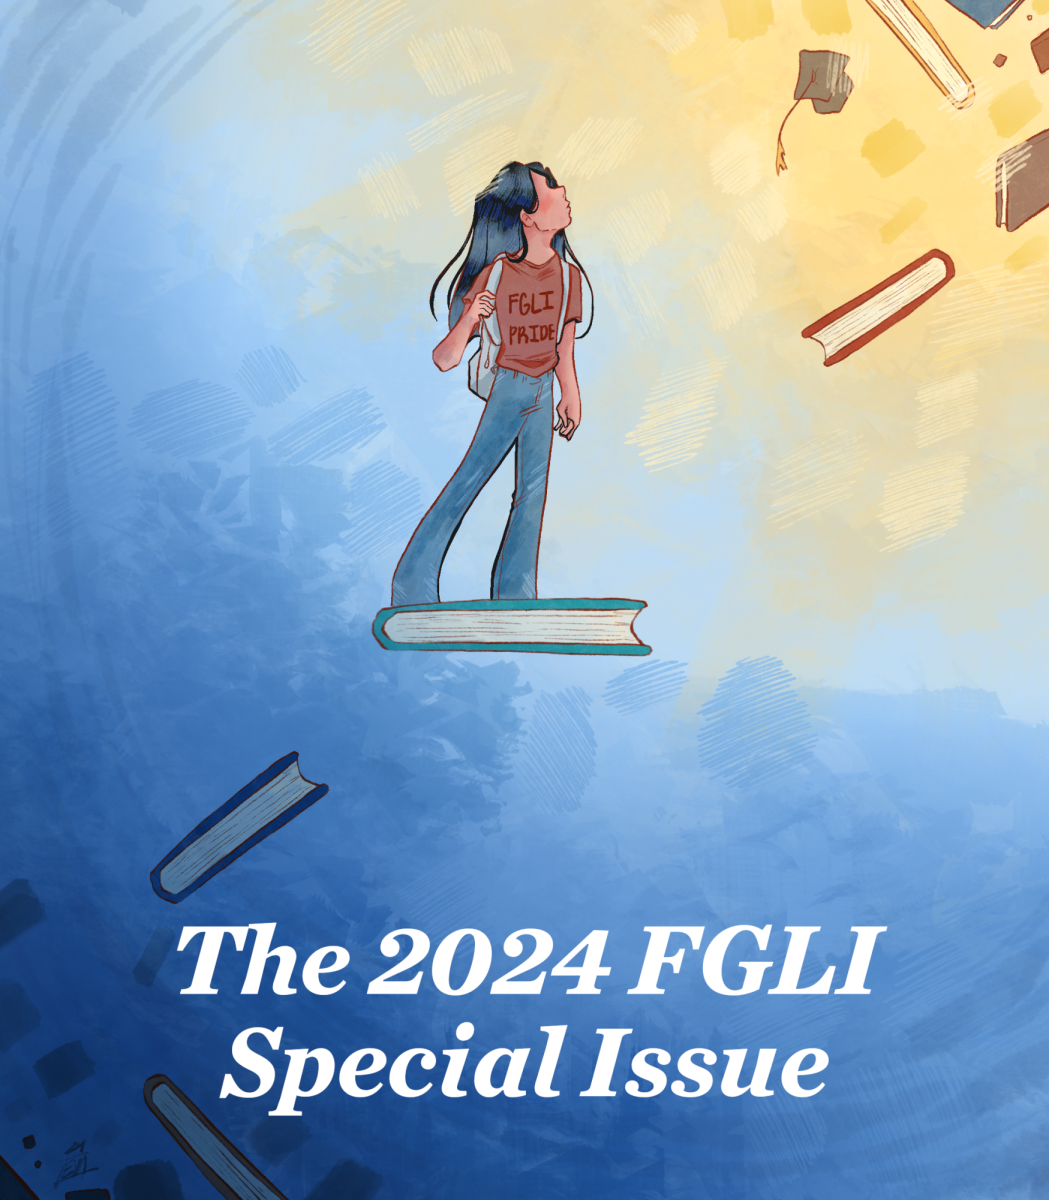 FGLI+Special+Issue%3A+A+Foreword+from+the+Editor